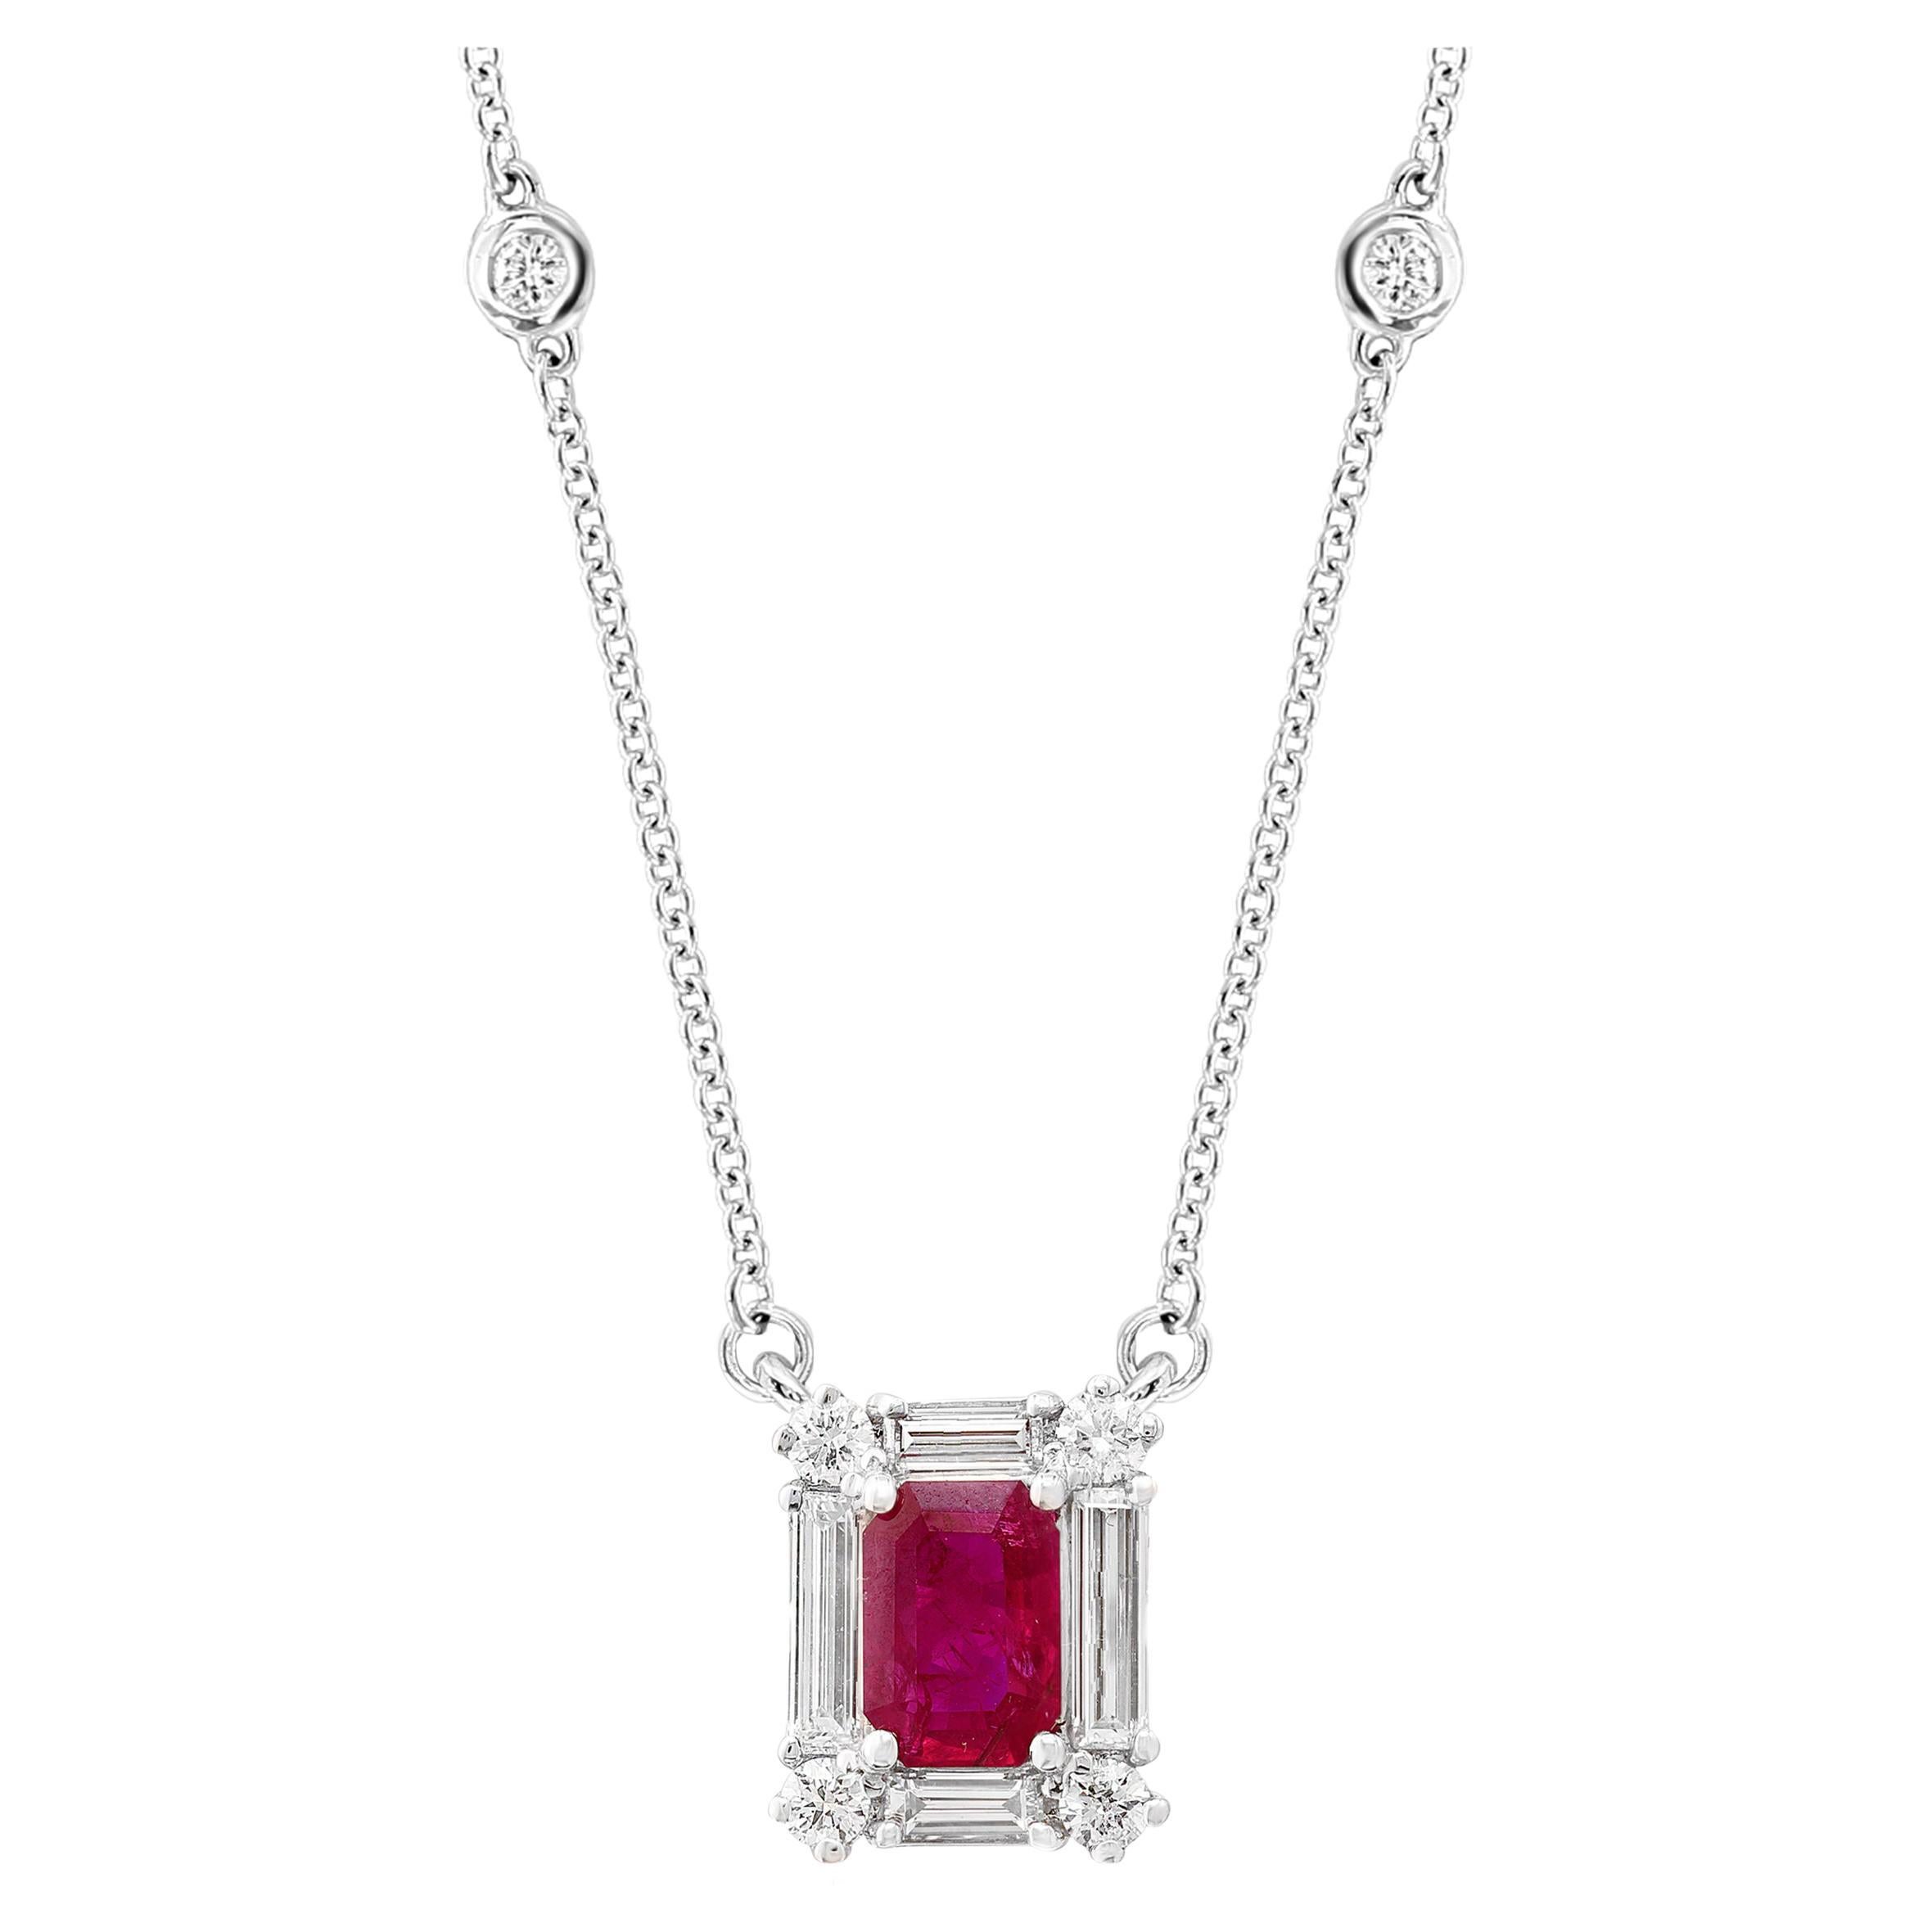 0.79 Carat Emerald Cut Ruby and Diamond Pendant Necklace in 14K White Gold